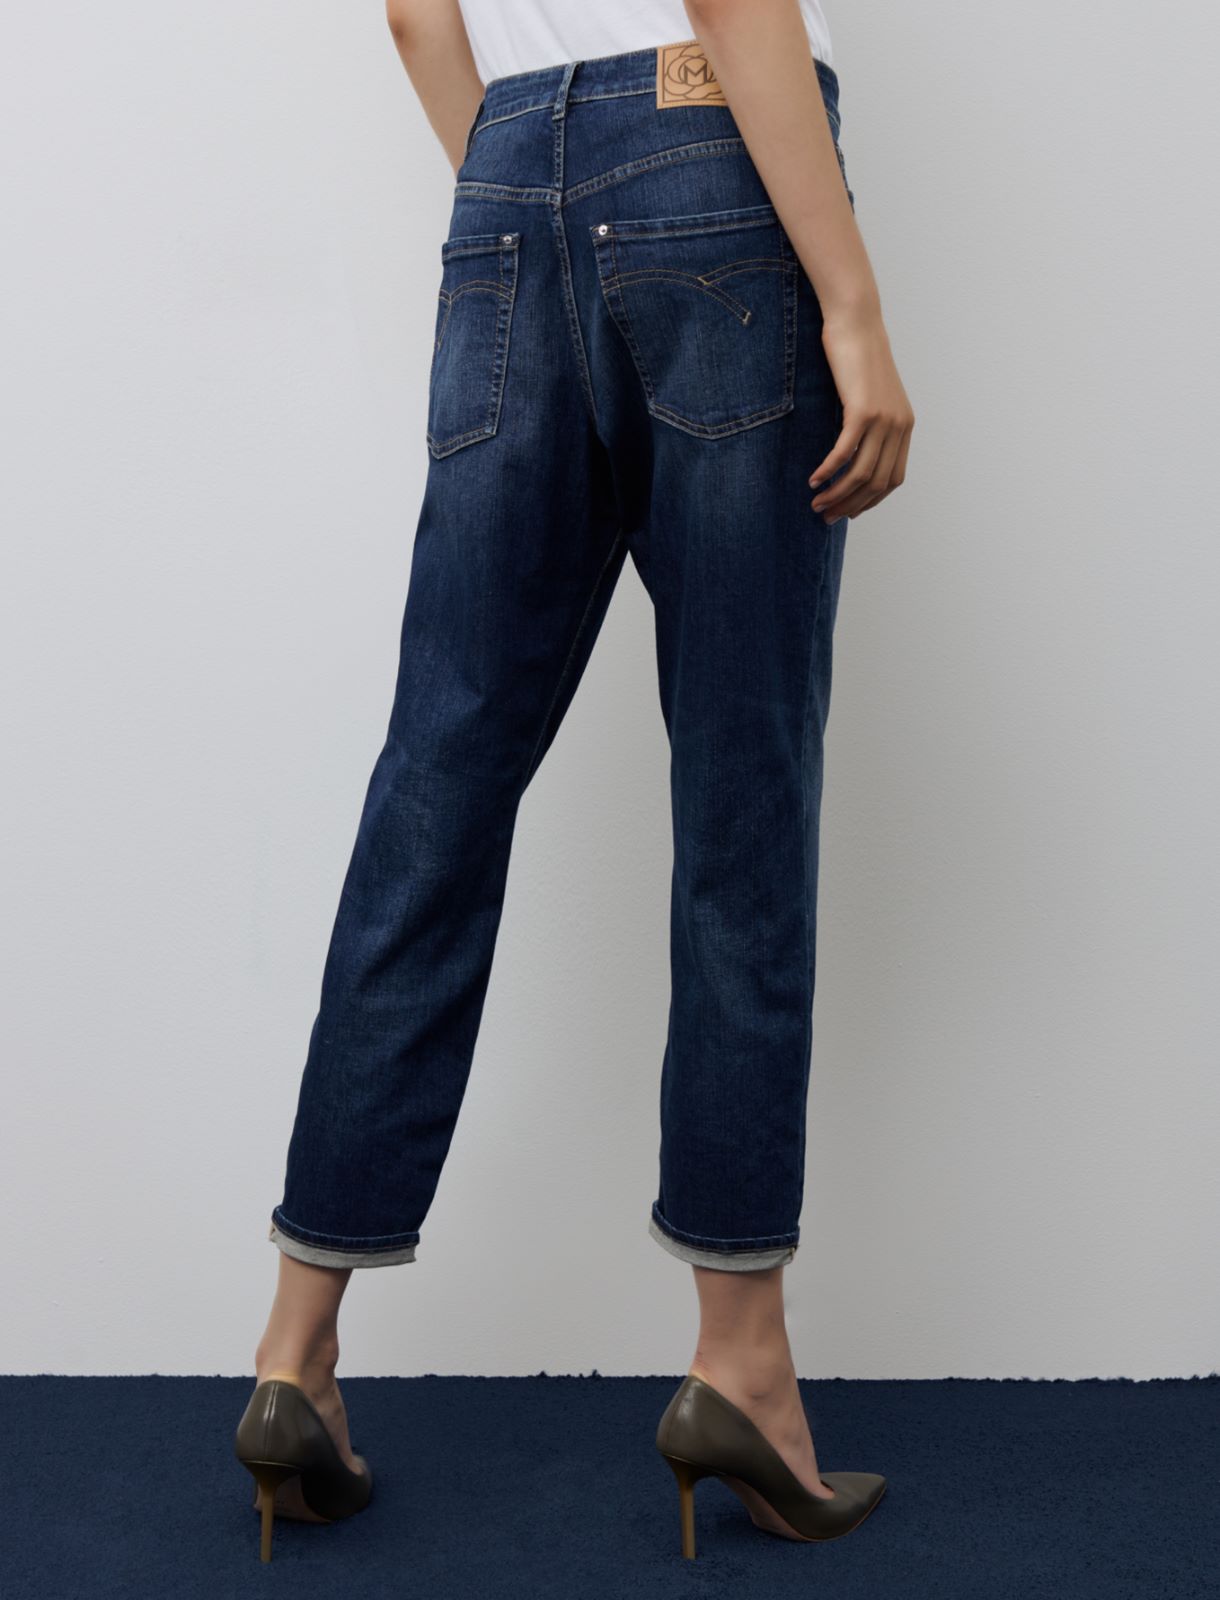 Jeans in Tomboy Fit Marella